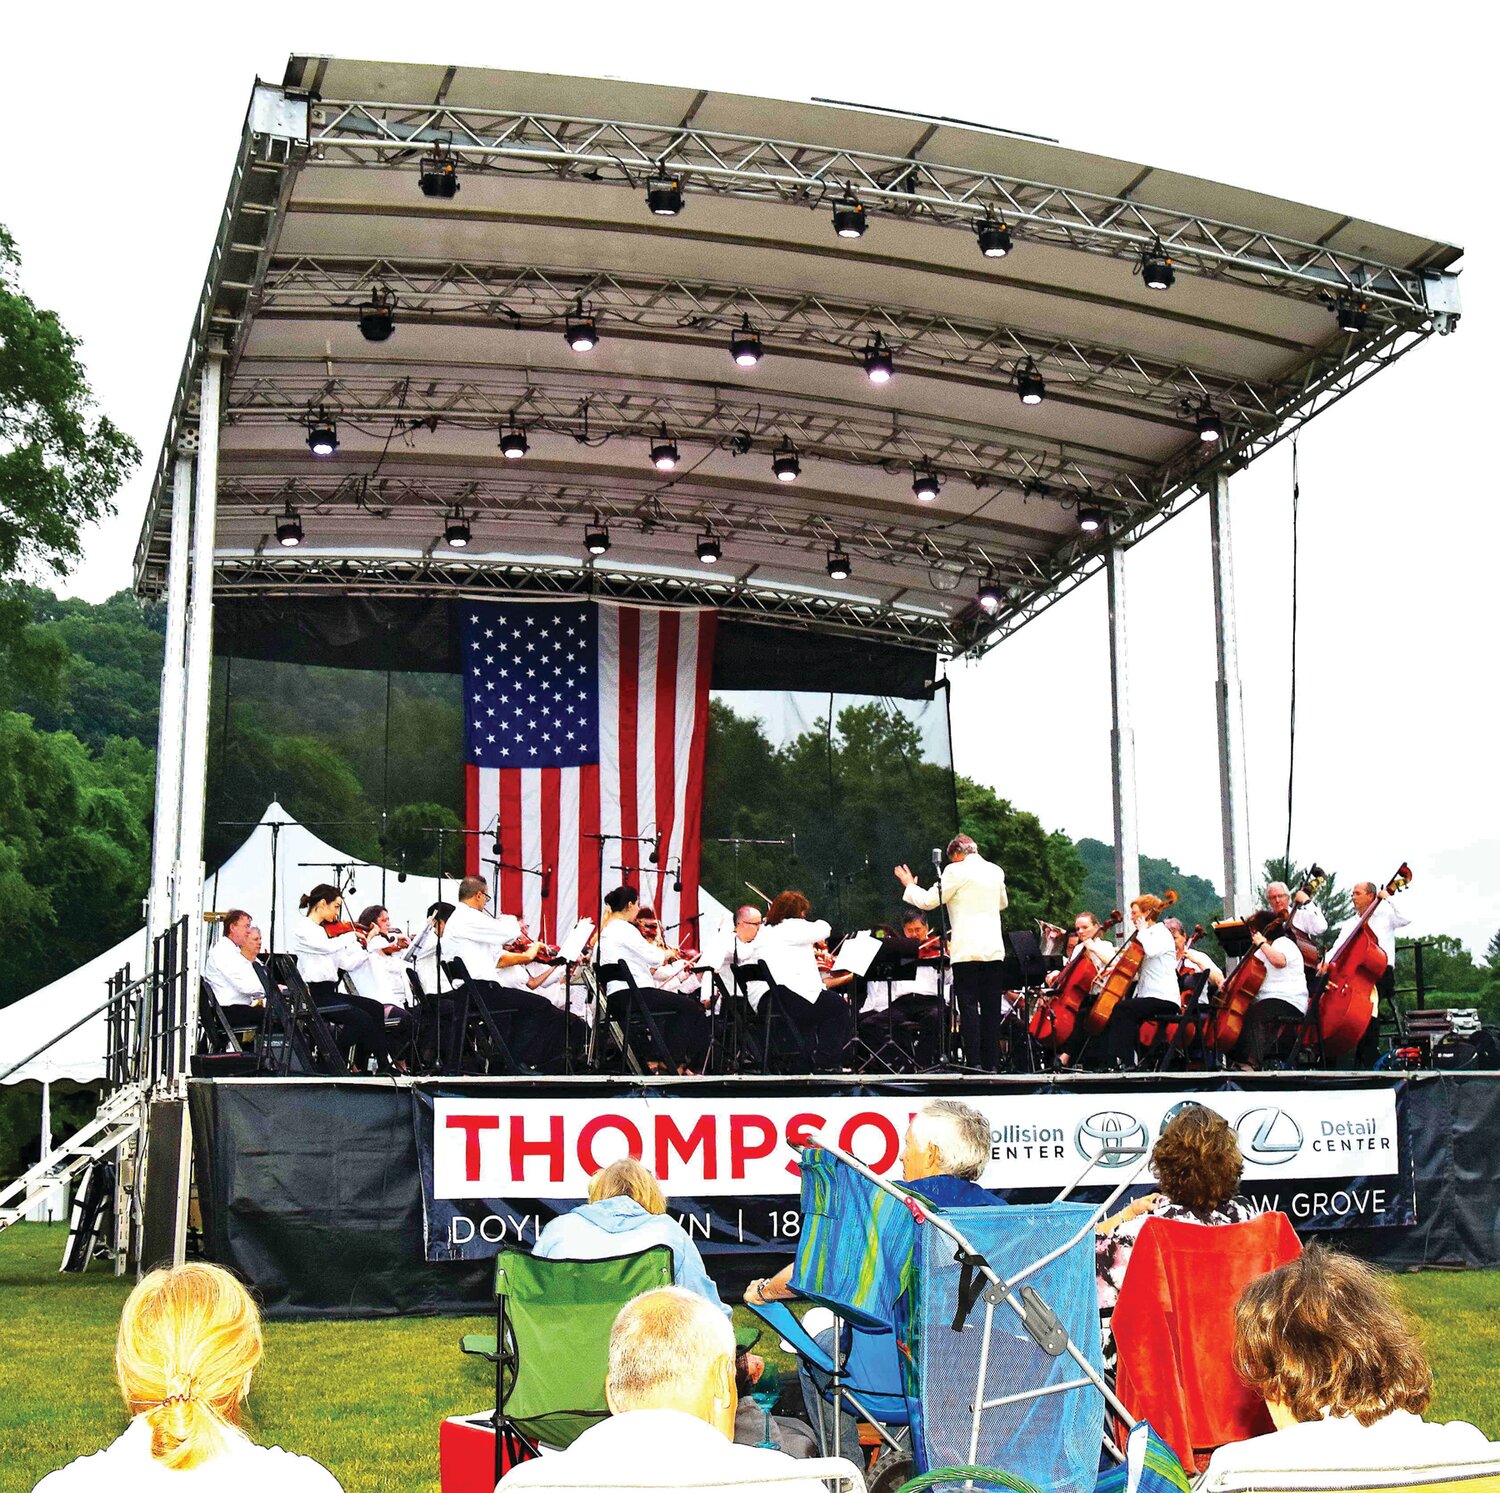 The Riverside Symphonia performs under the direction of conductor Mariusz Smolij.